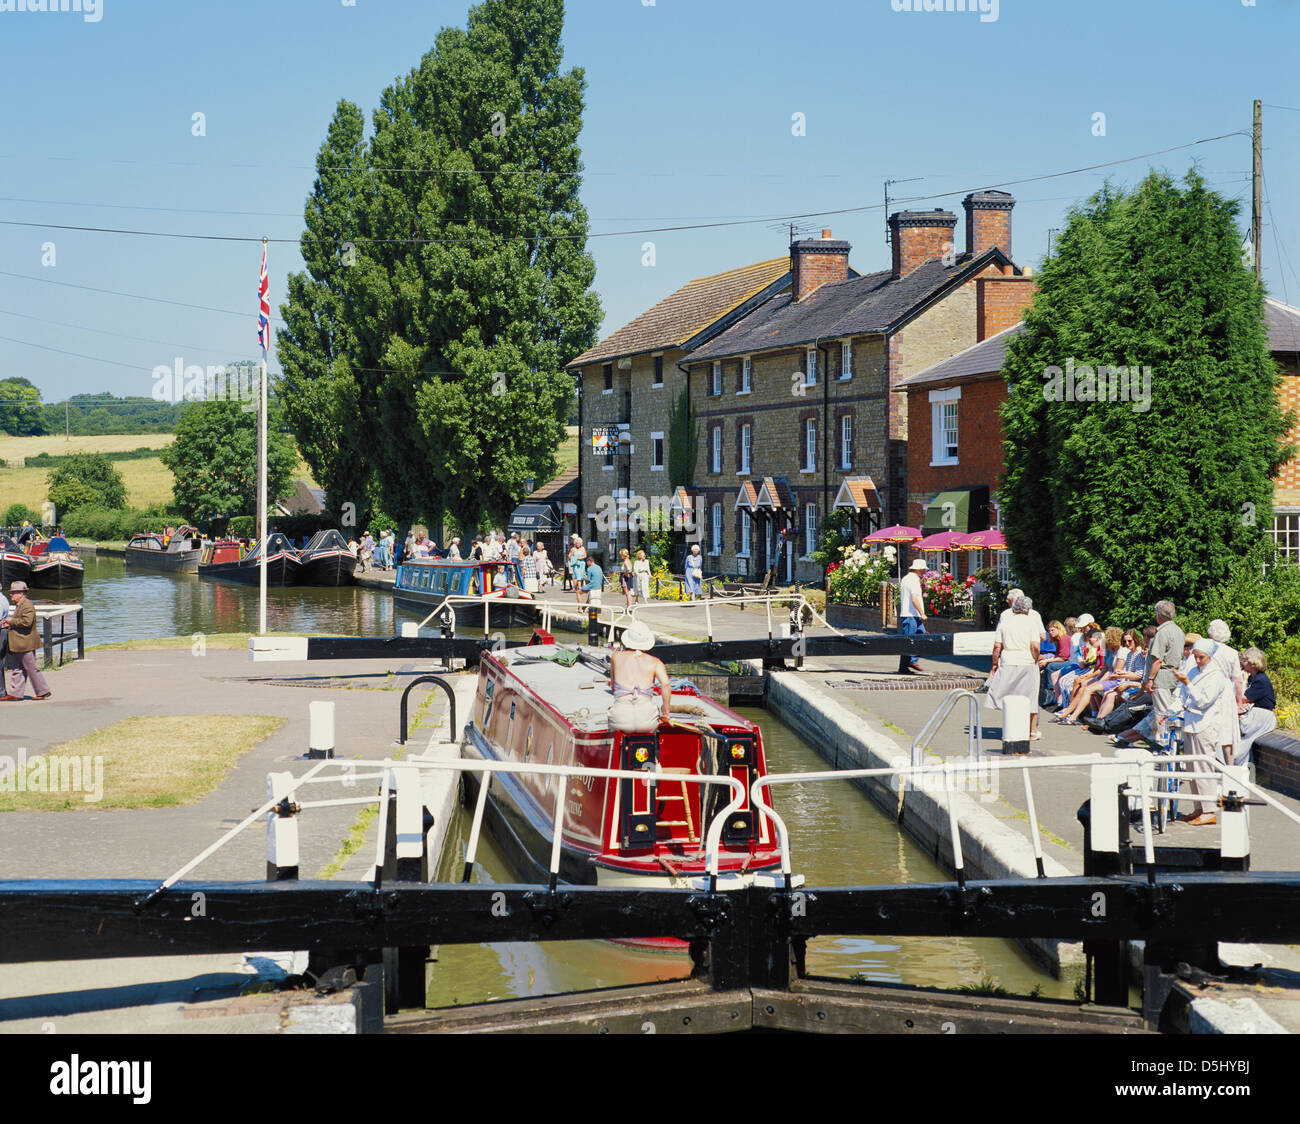 Stoke Bruerne, Grand Union Canal, Northants, England, GB Banque D'Images